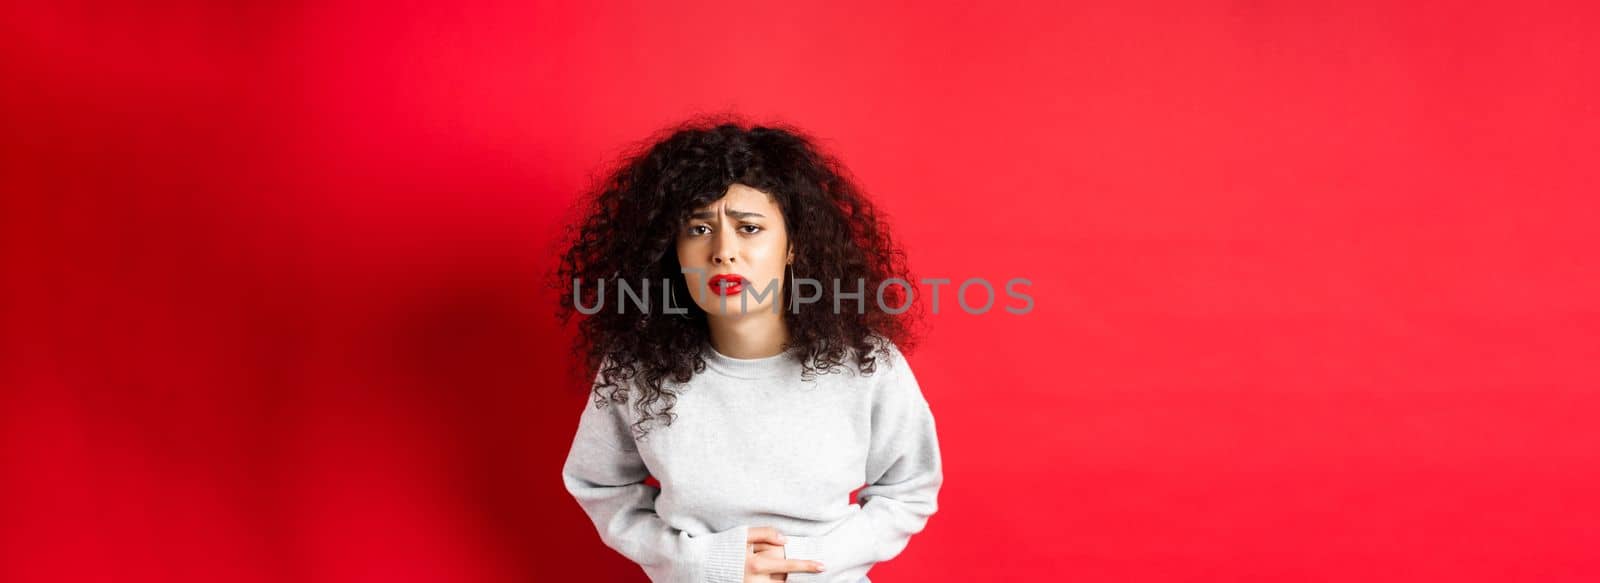 Image of young woman having stomach ache, bending from pain and complaining on painful menstrual cramps, standing on red background.